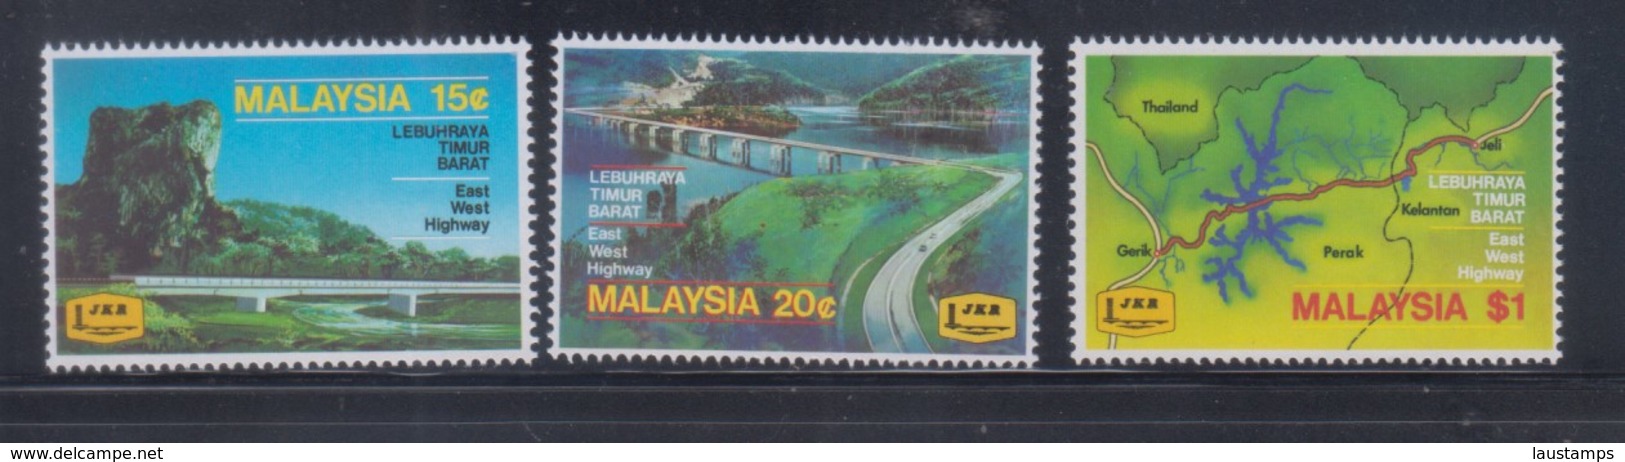 Malaysia 1983 Opening Of East-West Highway MNH - Malesia (1964-...)